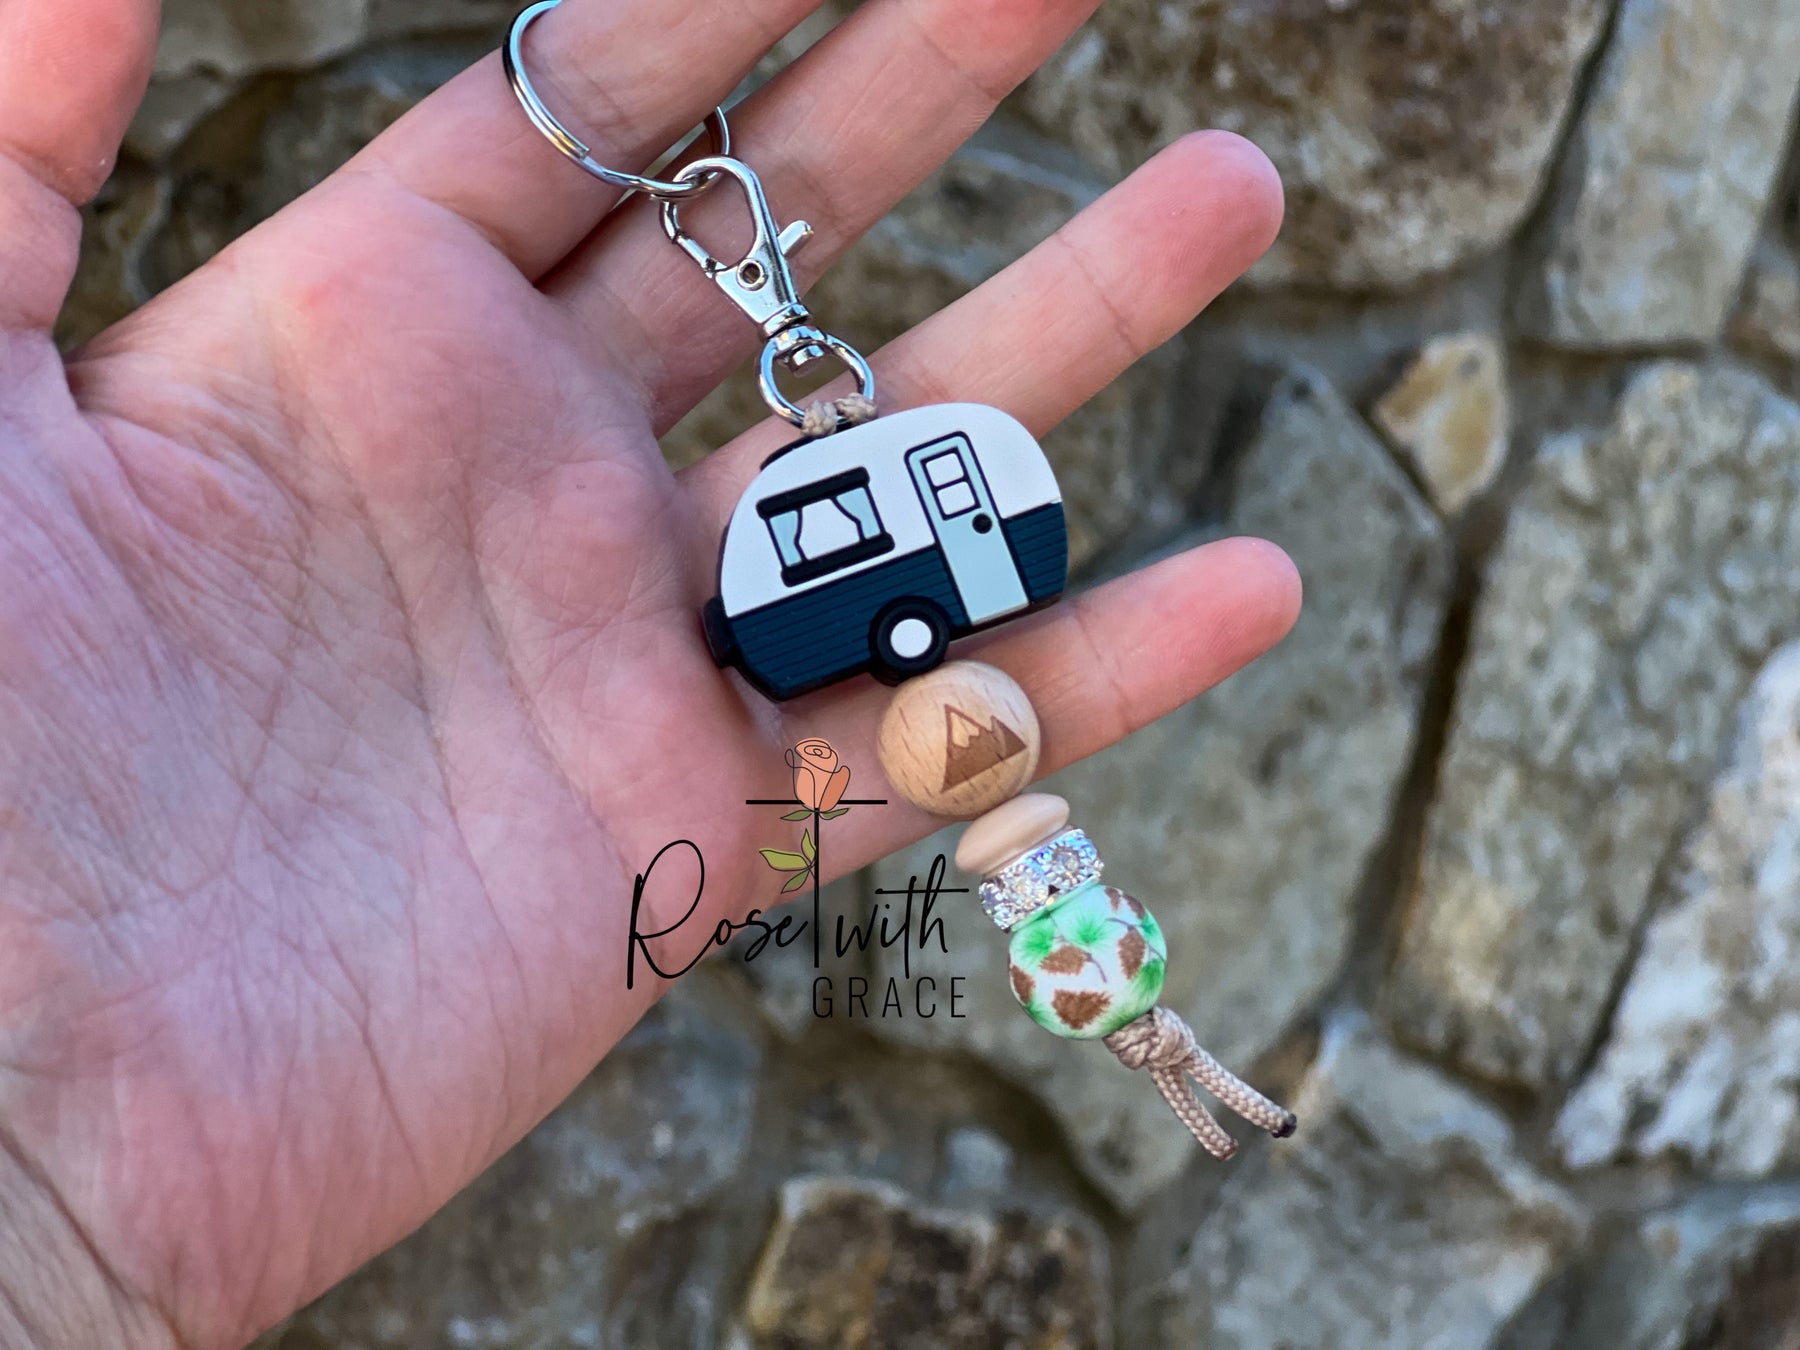 CAMPIN IN THE MOUNTAINS MINI KEYCHAIN Rose with Grace LLC